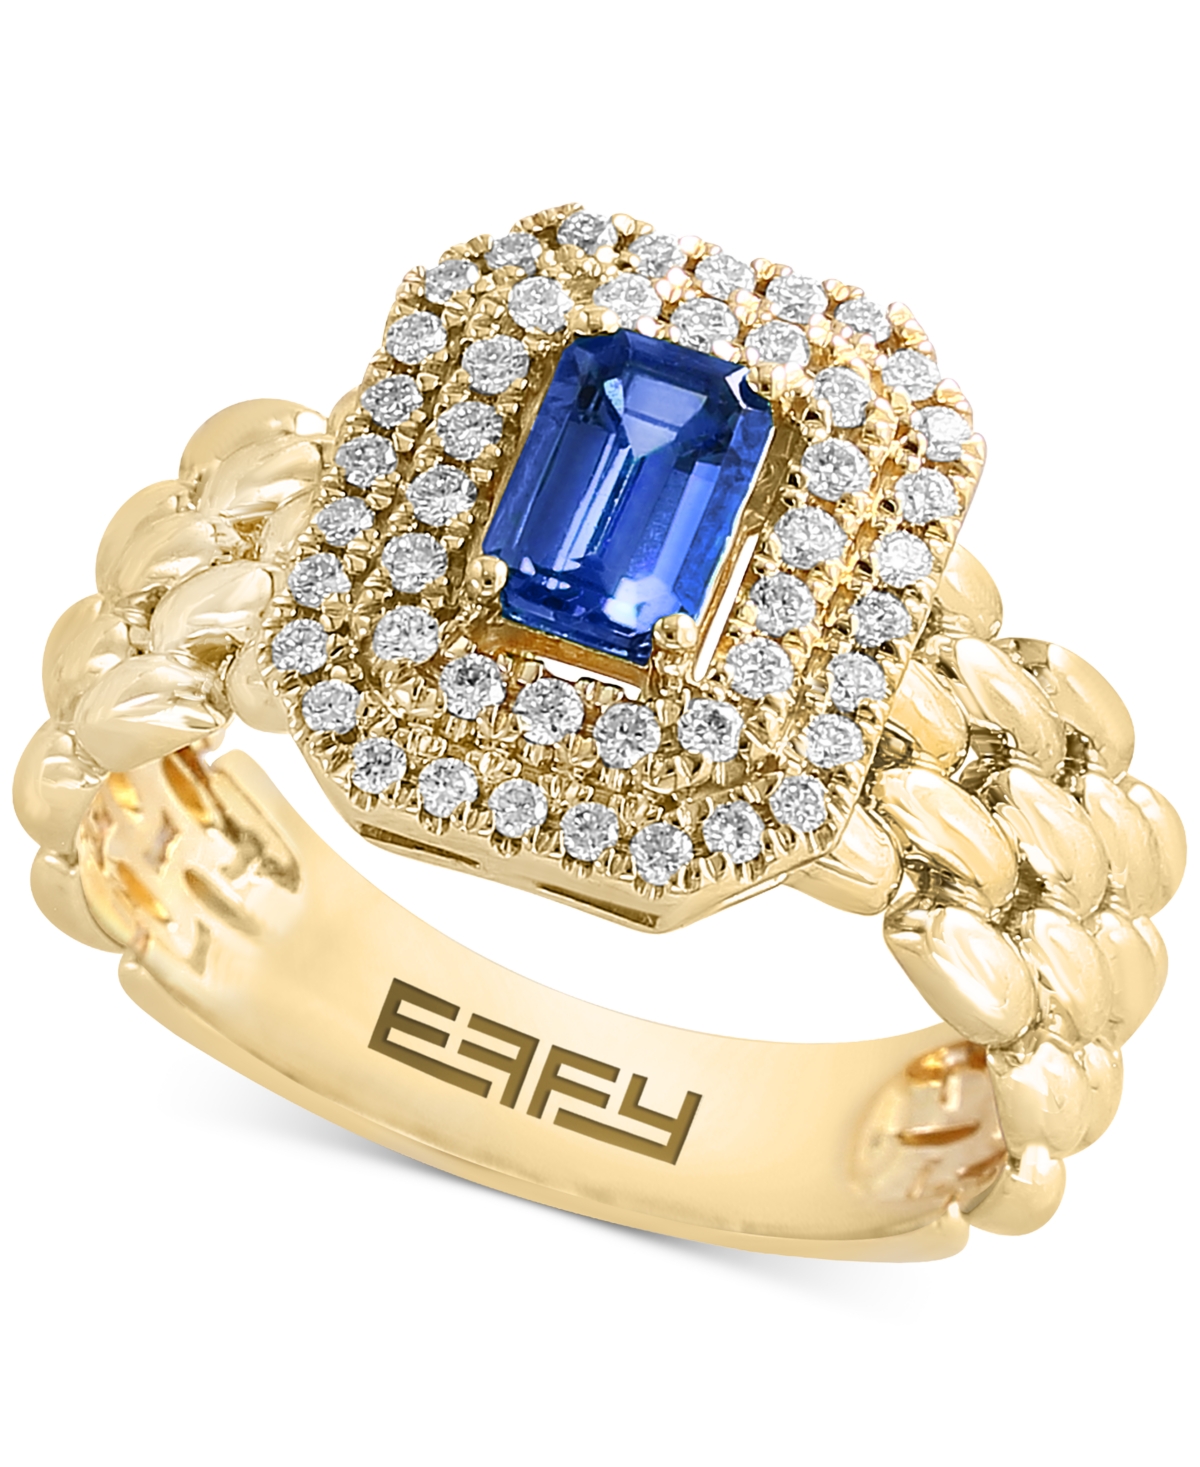 Sapphire (1-1/2 ct. t.w.) & Diamond (5/8 ct. t.w.) Double Halo Statement Ring in 14k Gold - Yellow Gol